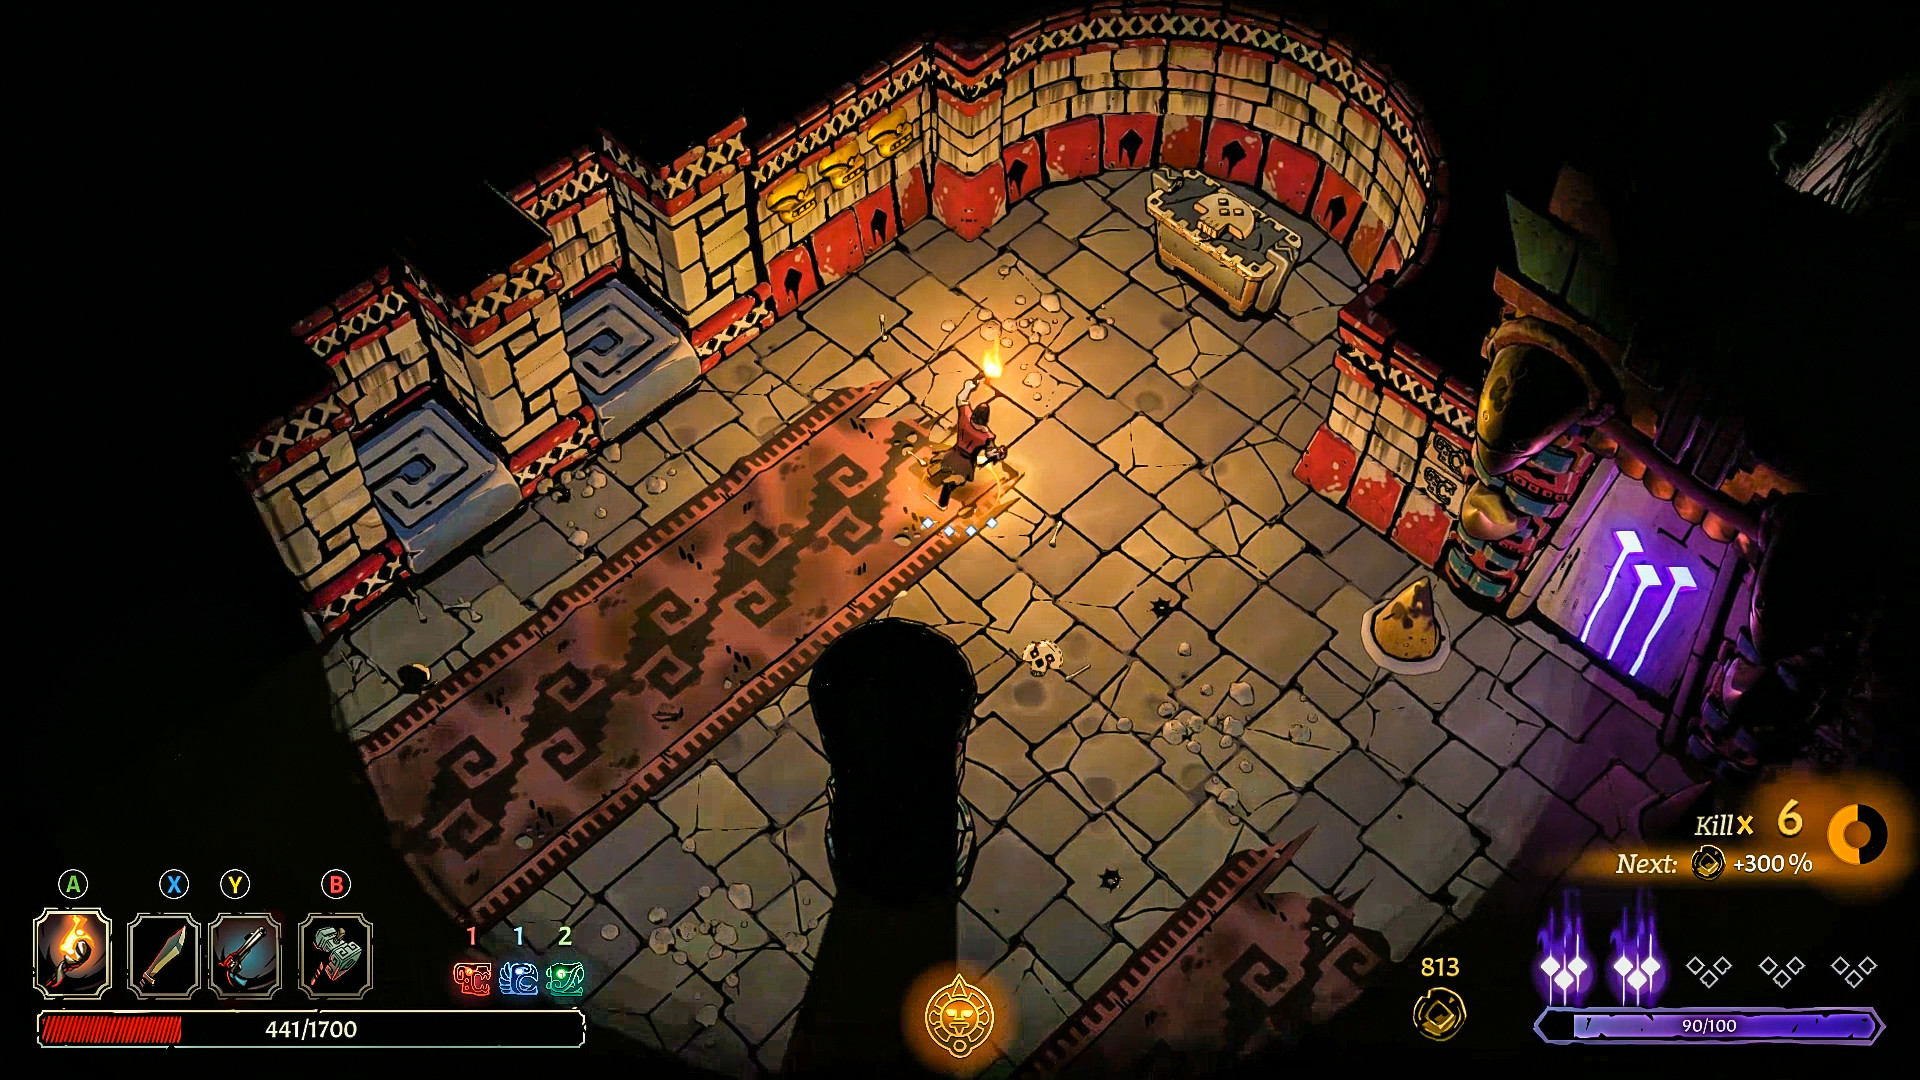 free for apple download Curse of the Dead Gods